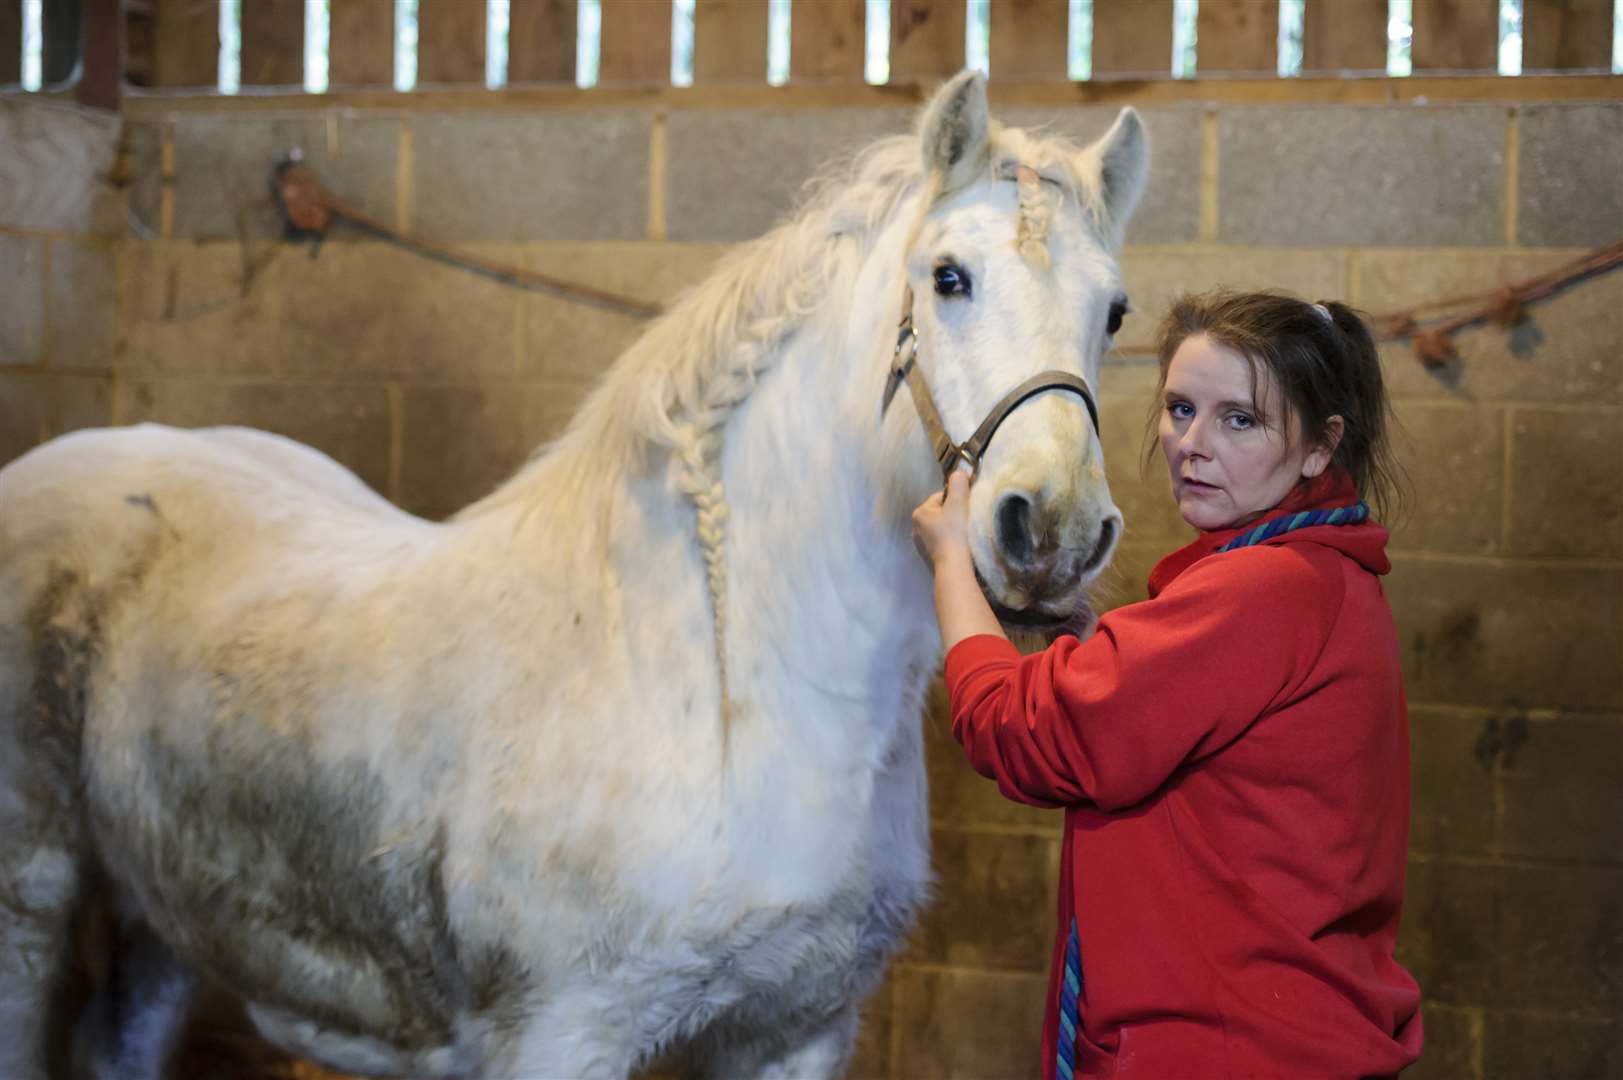 Horse owner Tracy Briggs is hoping to crowdfund a major operation for one of her horses, Silver